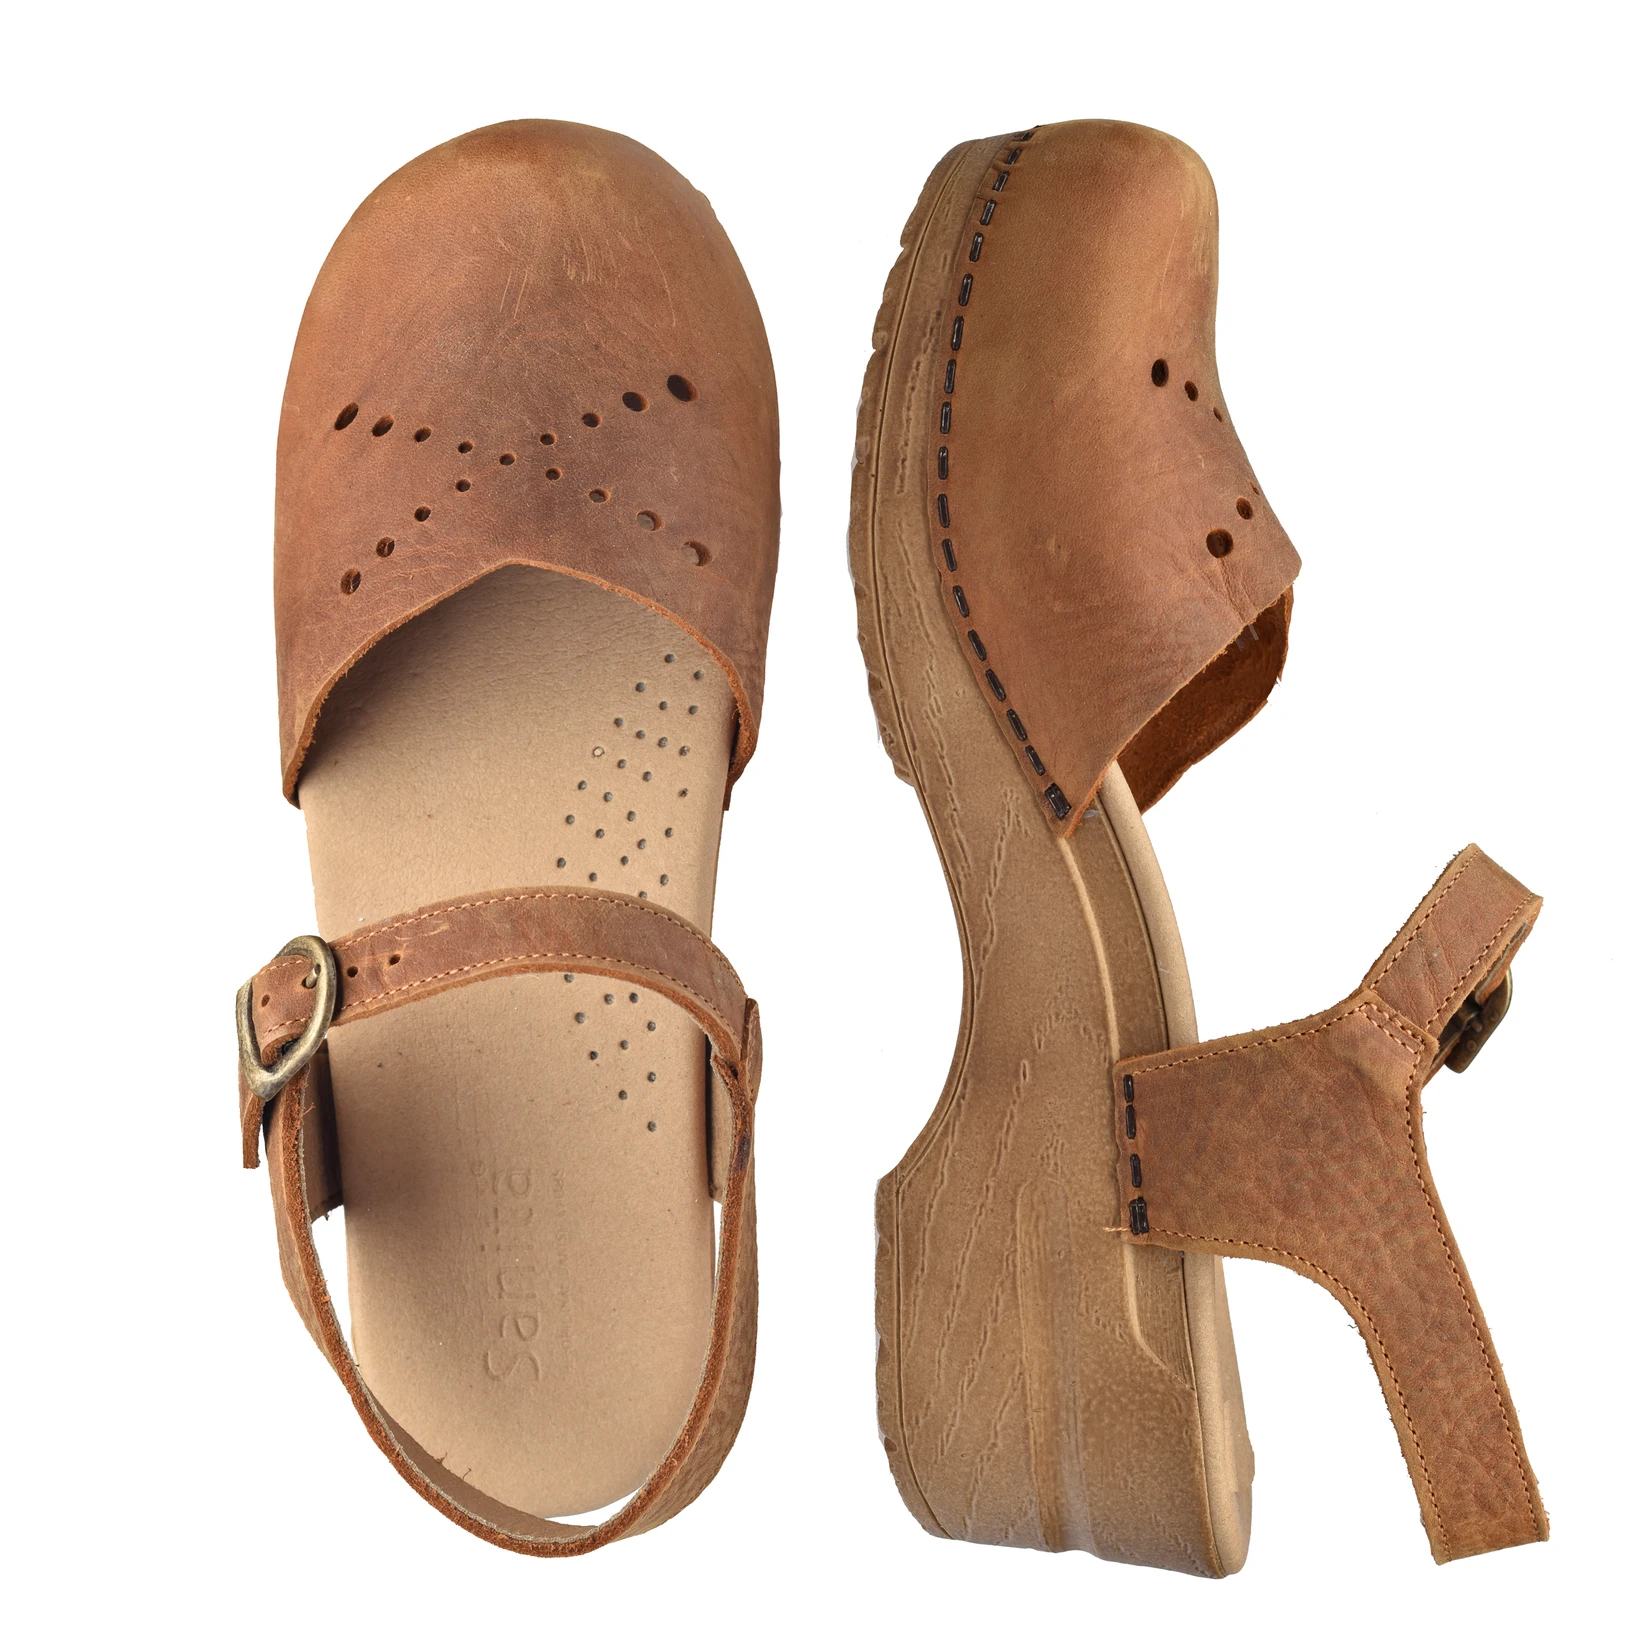 Panter I forhold Skibform Clog sandals from Sanita - Buy delicious clog sandals here